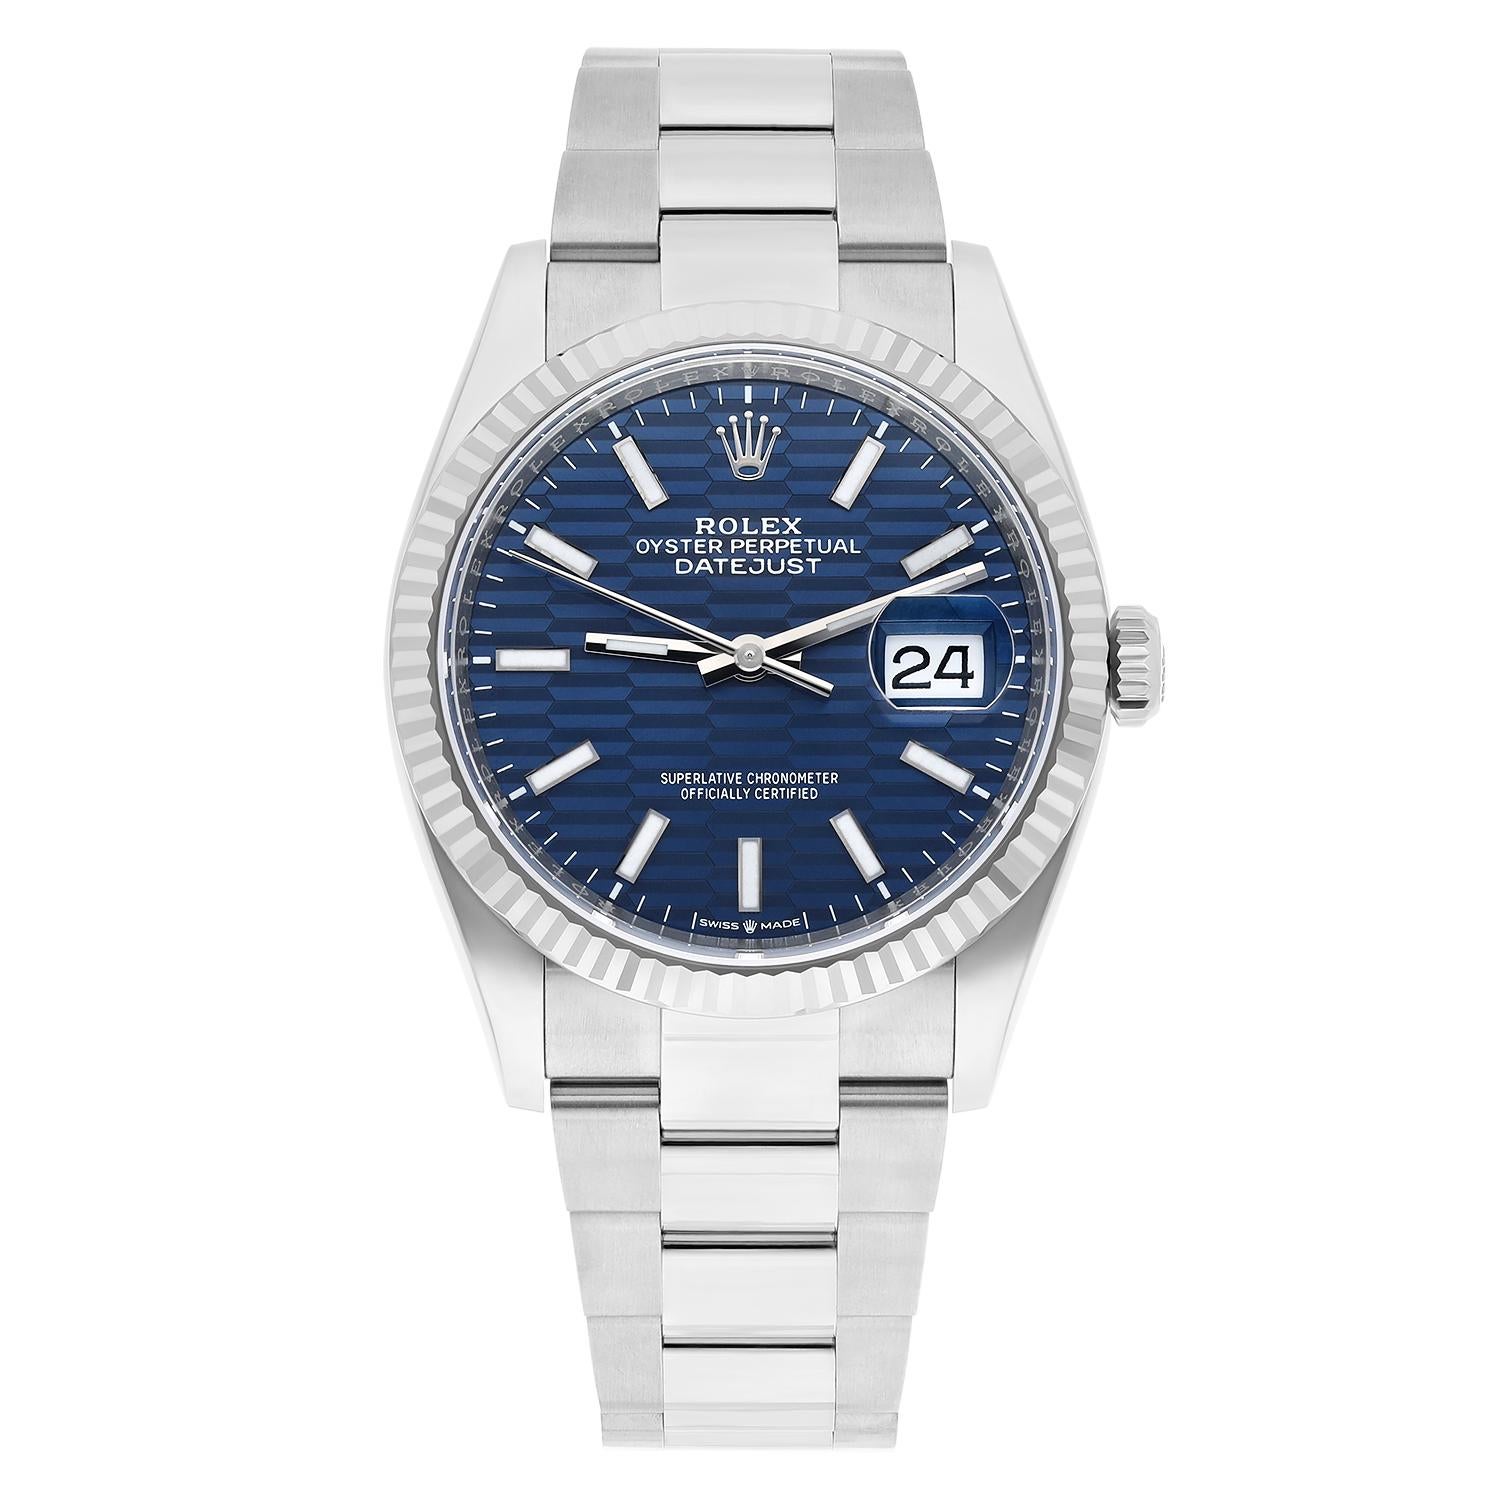 Introducing the Rolex 126234 Datejust 36mm wristwatch, a stunning timepiece with a silver case and bracelet. This luxury watch features a blue motif dial with stick indexes, luminous hands, and a date indicator. With a self-winding Swiss movement,